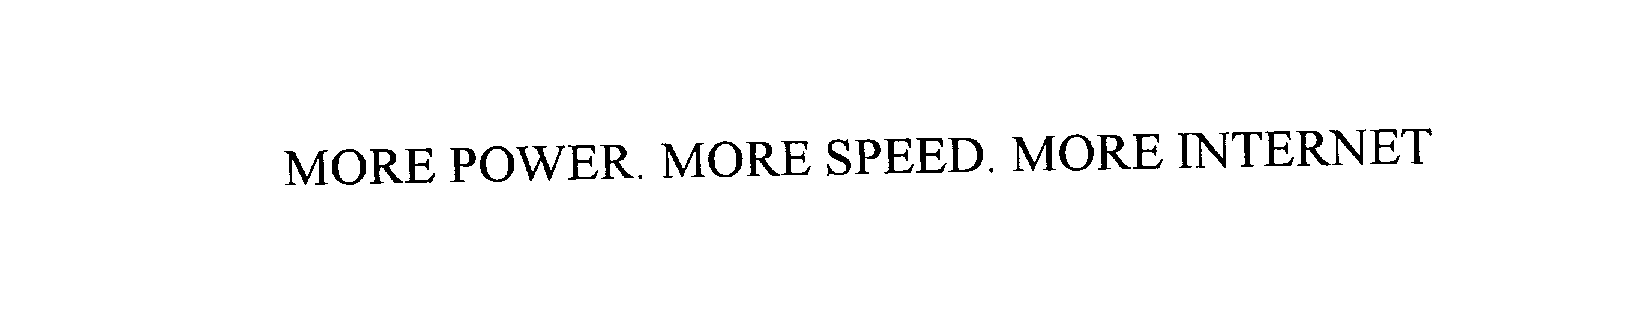  MORE POWER. MORE SPEED. MORE INTERNET